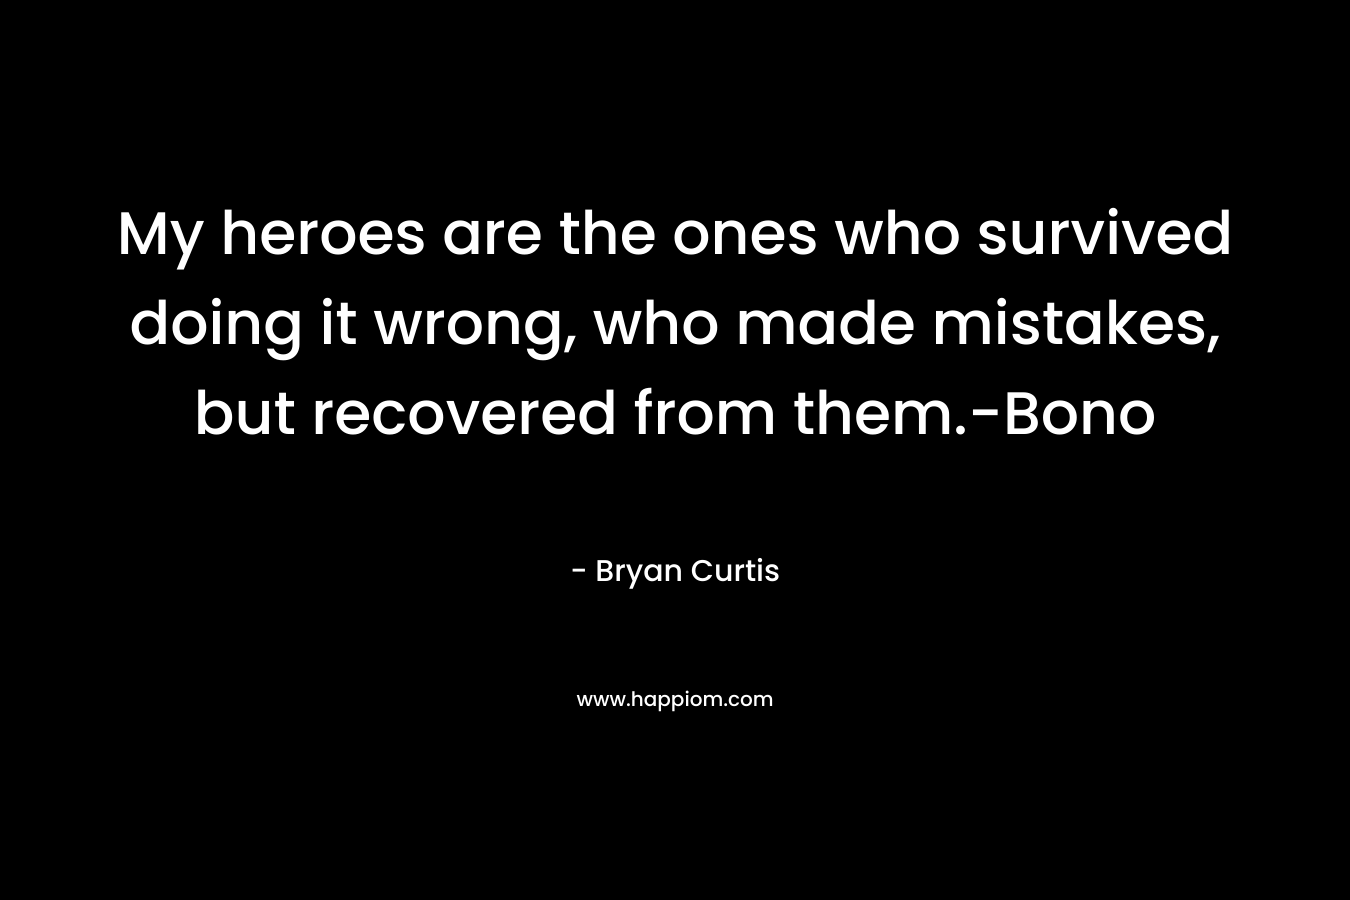 My heroes are the ones who survived doing it wrong, who made mistakes, but recovered from them.-Bono